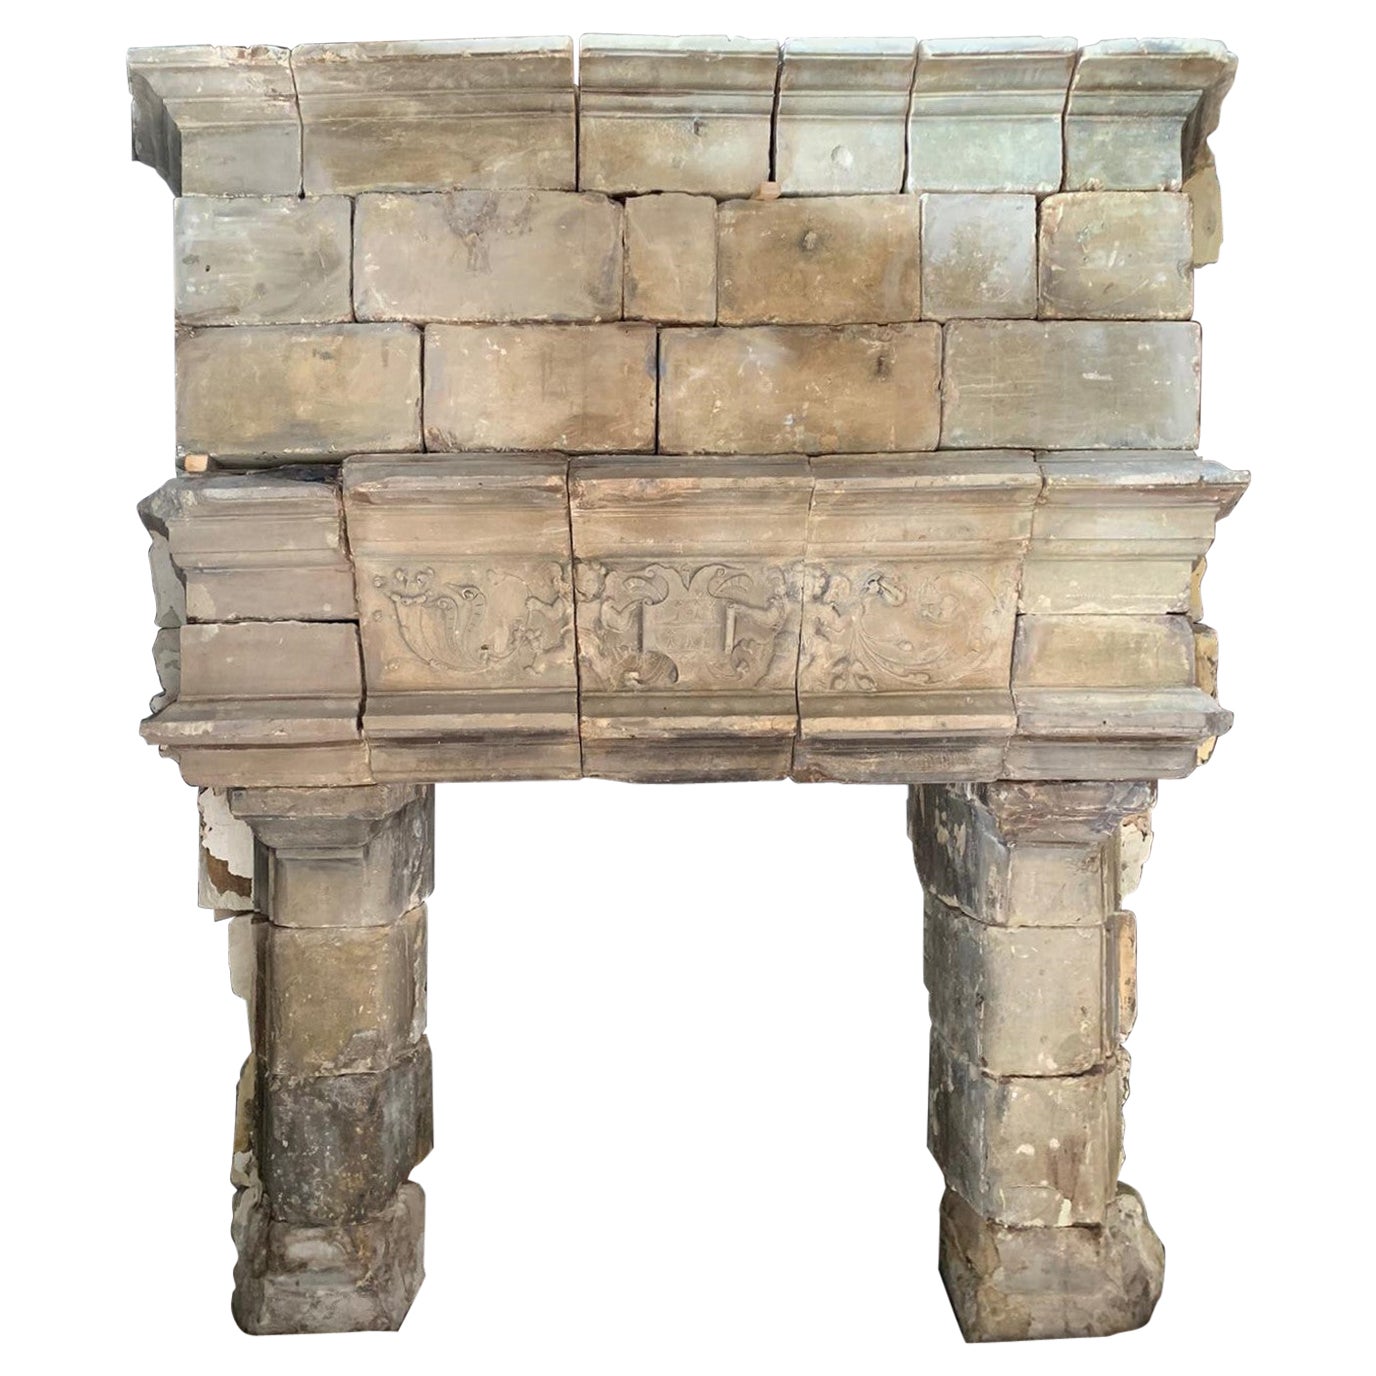 Antique and Important, Large Fireplace in Burgundy Stone, 16th Century France For Sale